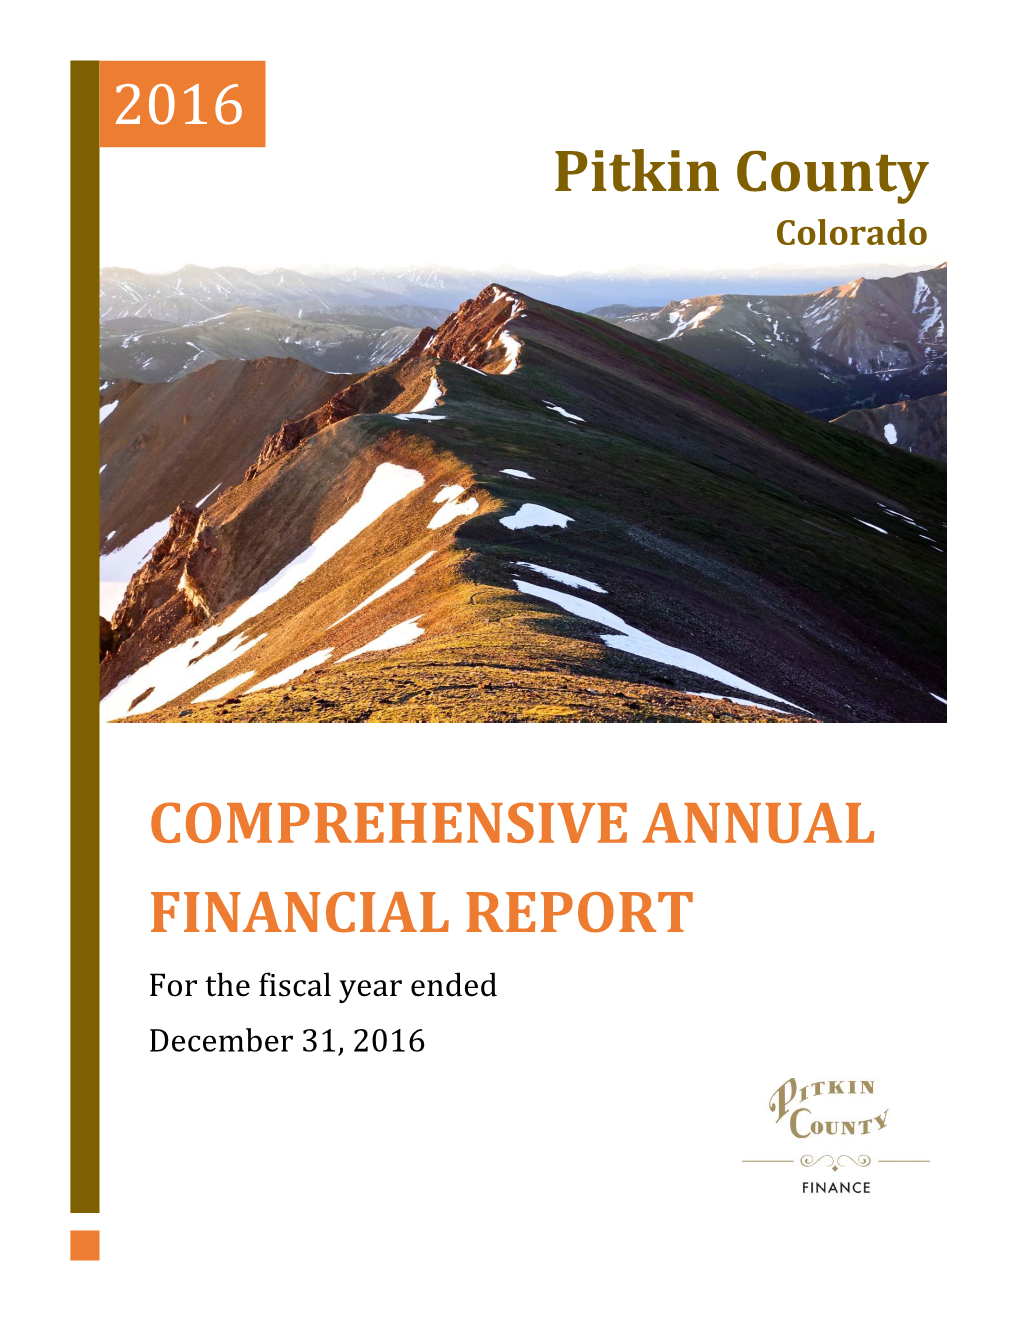 COMPREHENSIVE ANNUAL FINANCIAL REPORT Pitkin County